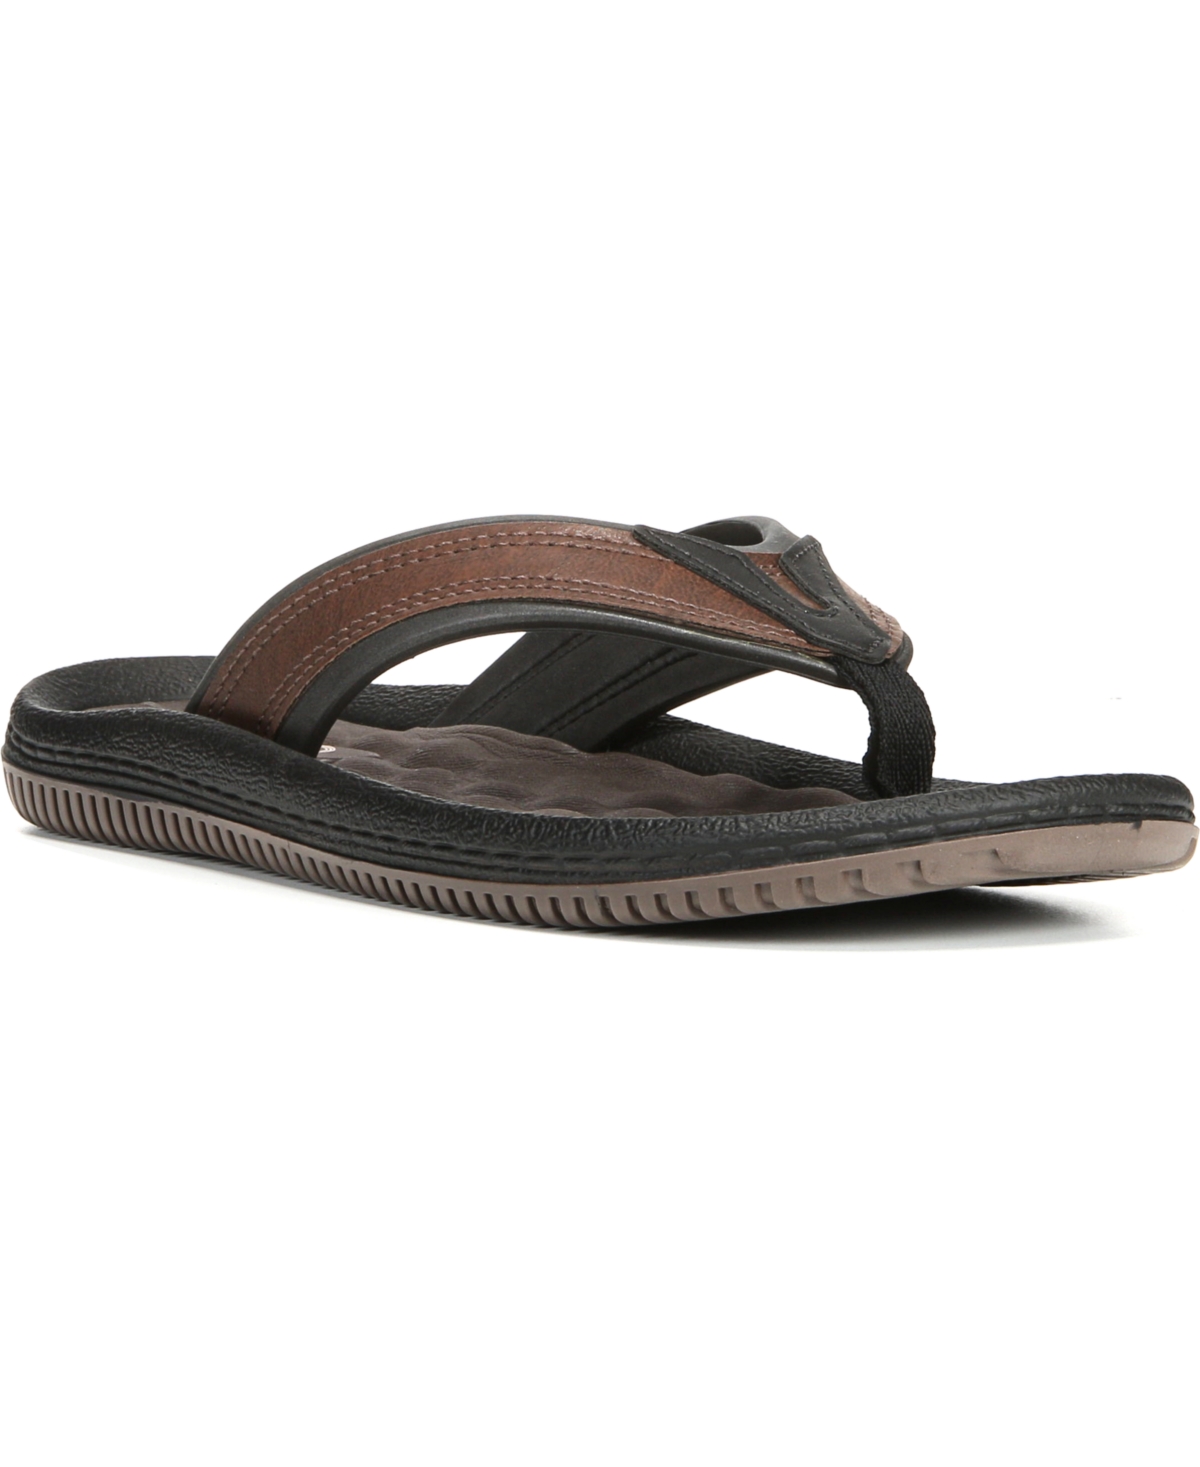 Dr. Scholl's Men's Donnar Thongs Slip-on Sandals In Brown